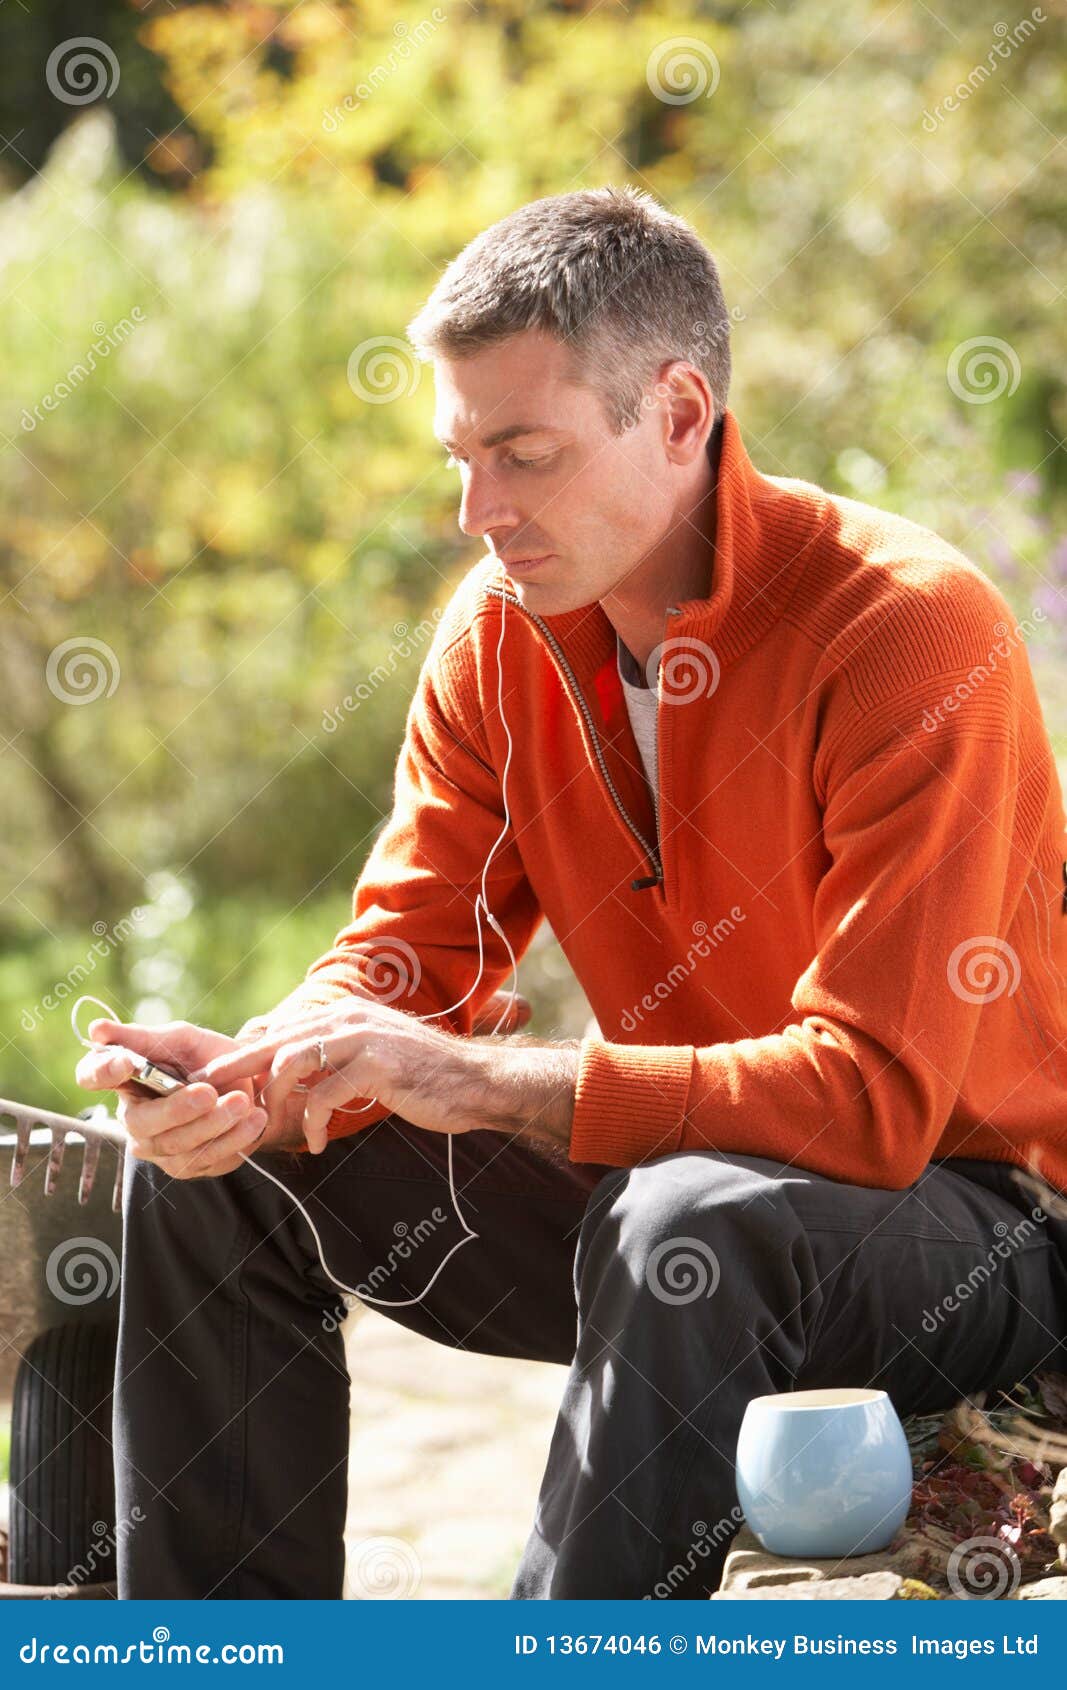 man outdoors listening to mp3 player